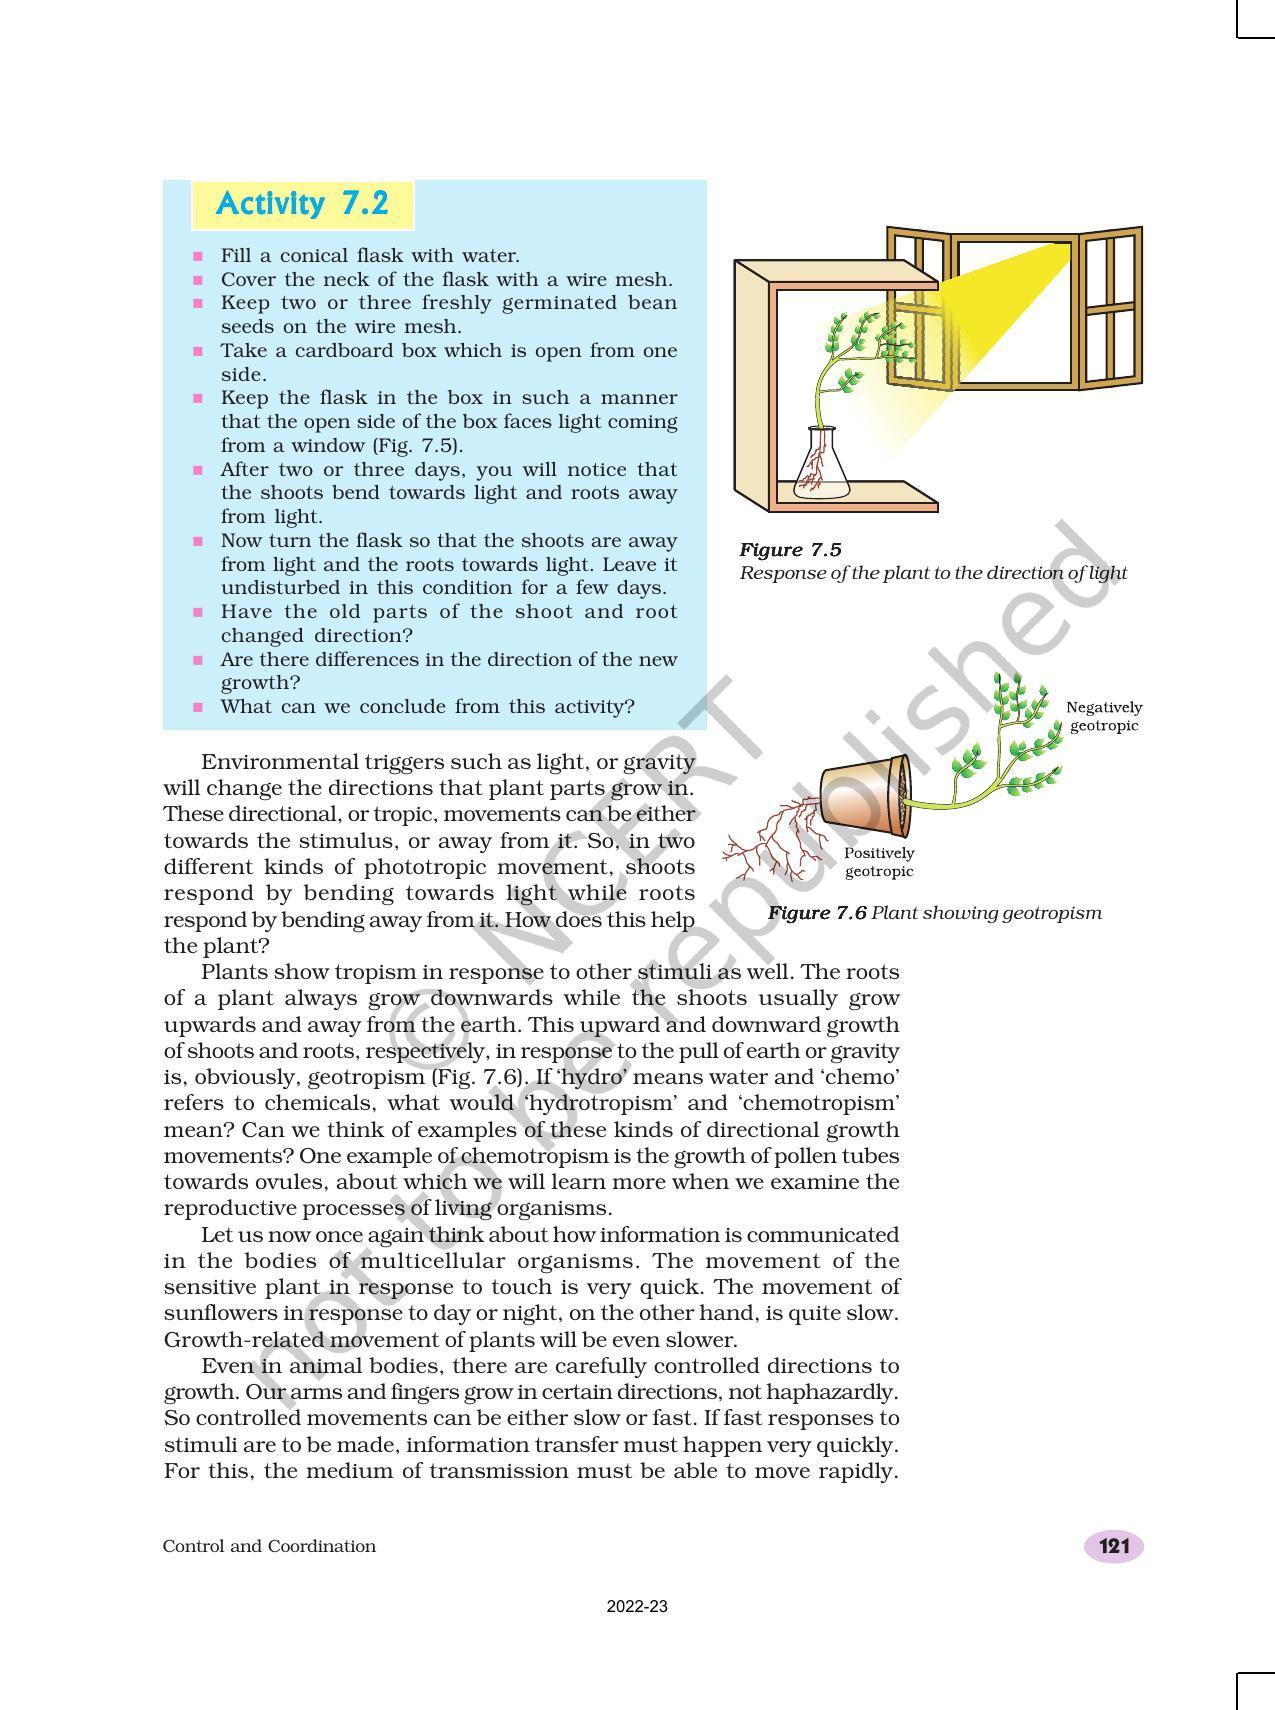 NCERT Book for Class 10 Science Chapter 7 Control and Coordination - Page 8